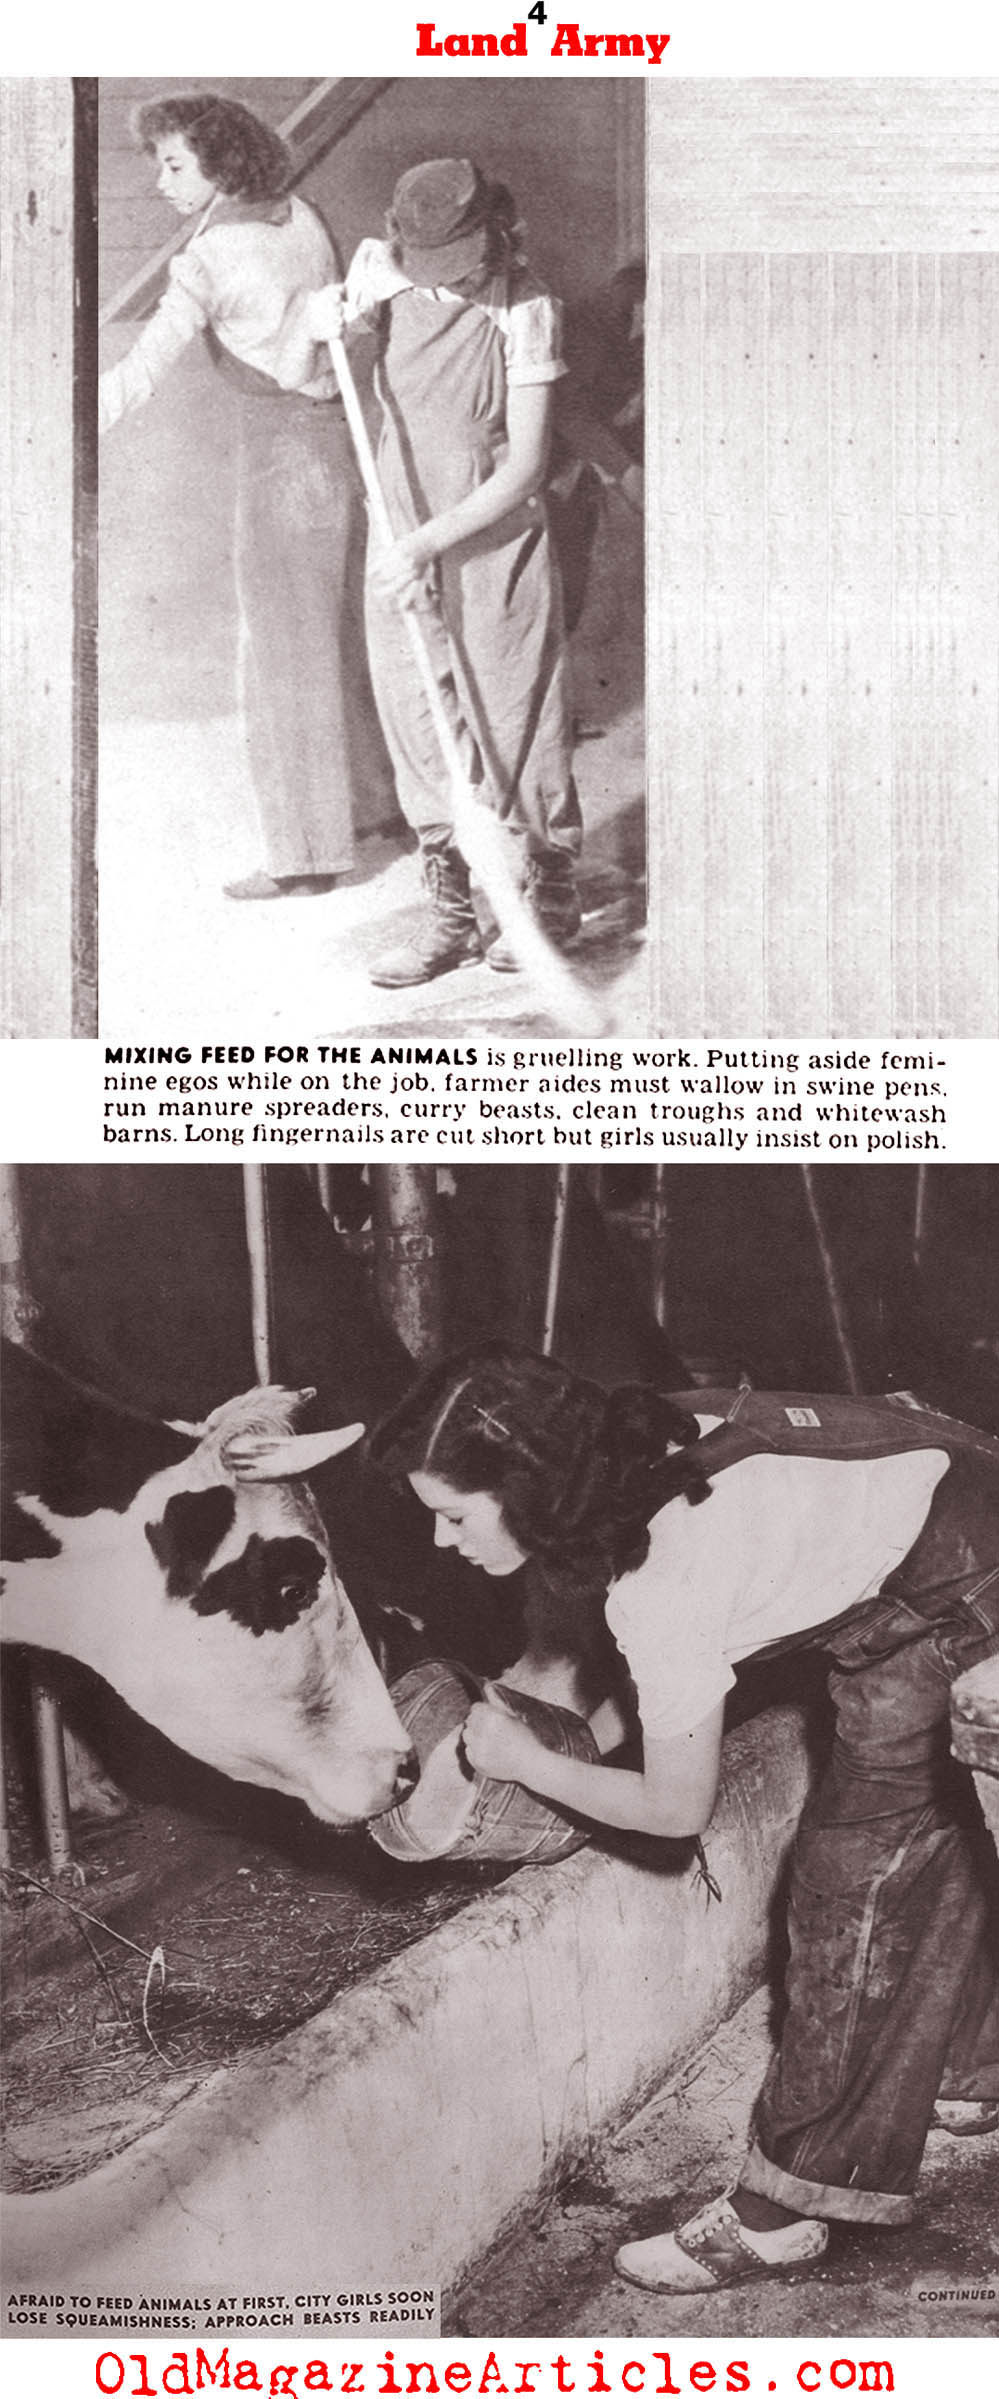 Women Worked The Farms (Click Magazine, 1943)